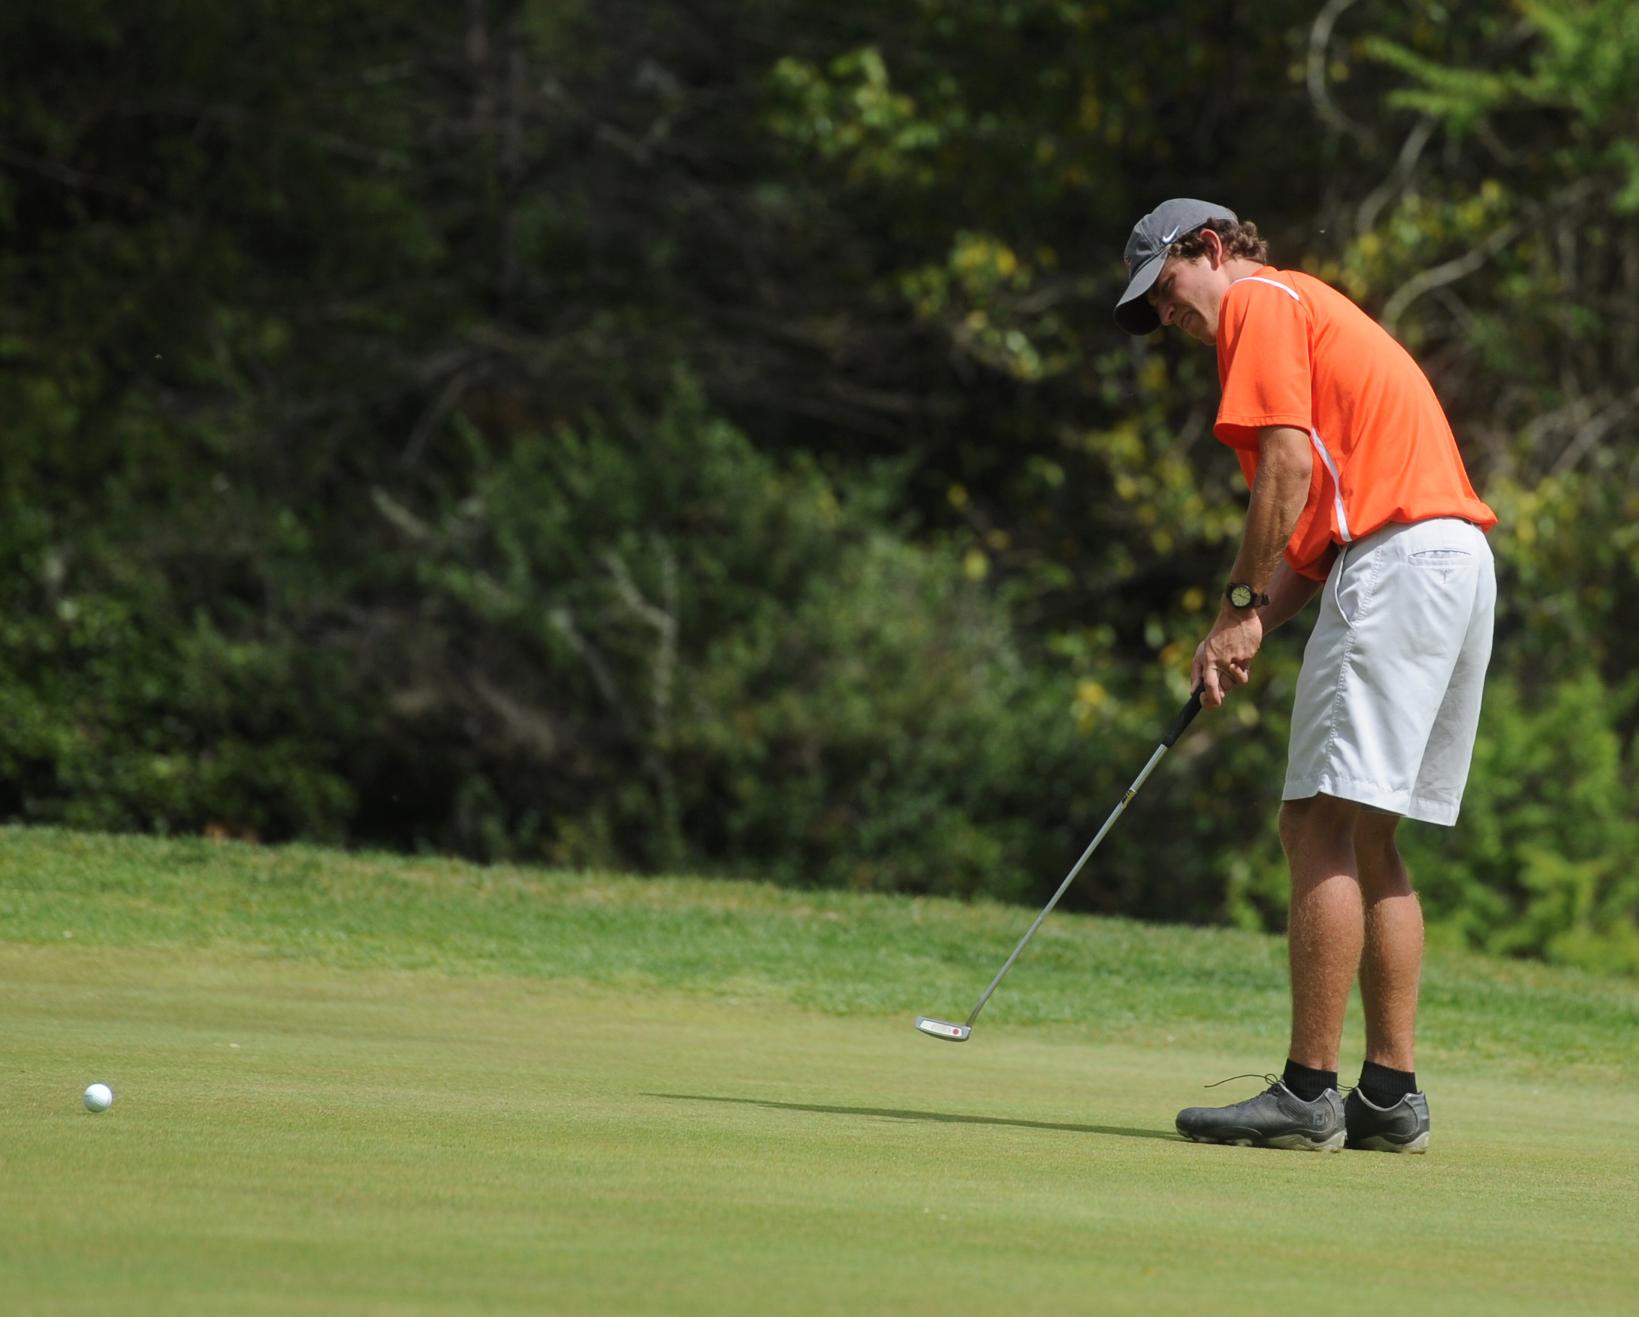 Led by Headrick, Eagles land in fifth after two rounds at Panther Invitational